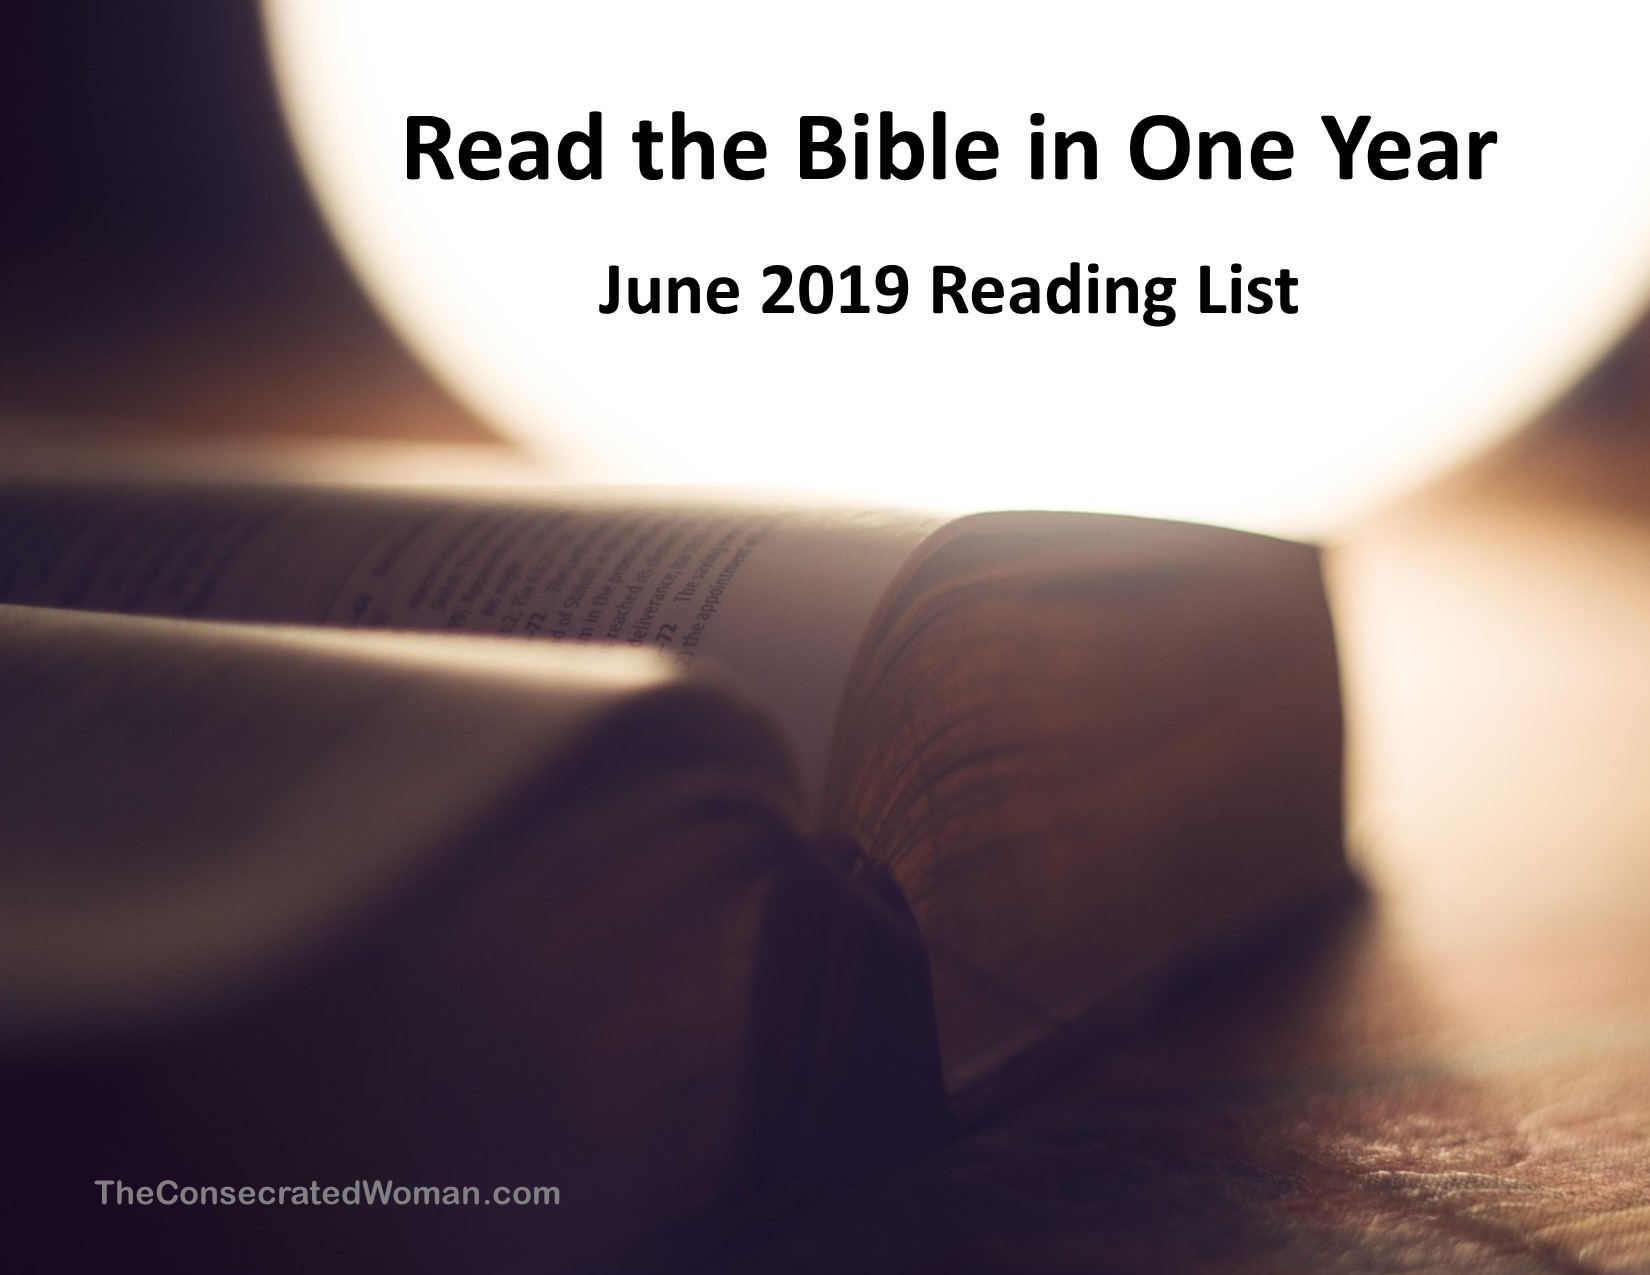 6 June Read the Bible in One Year Image